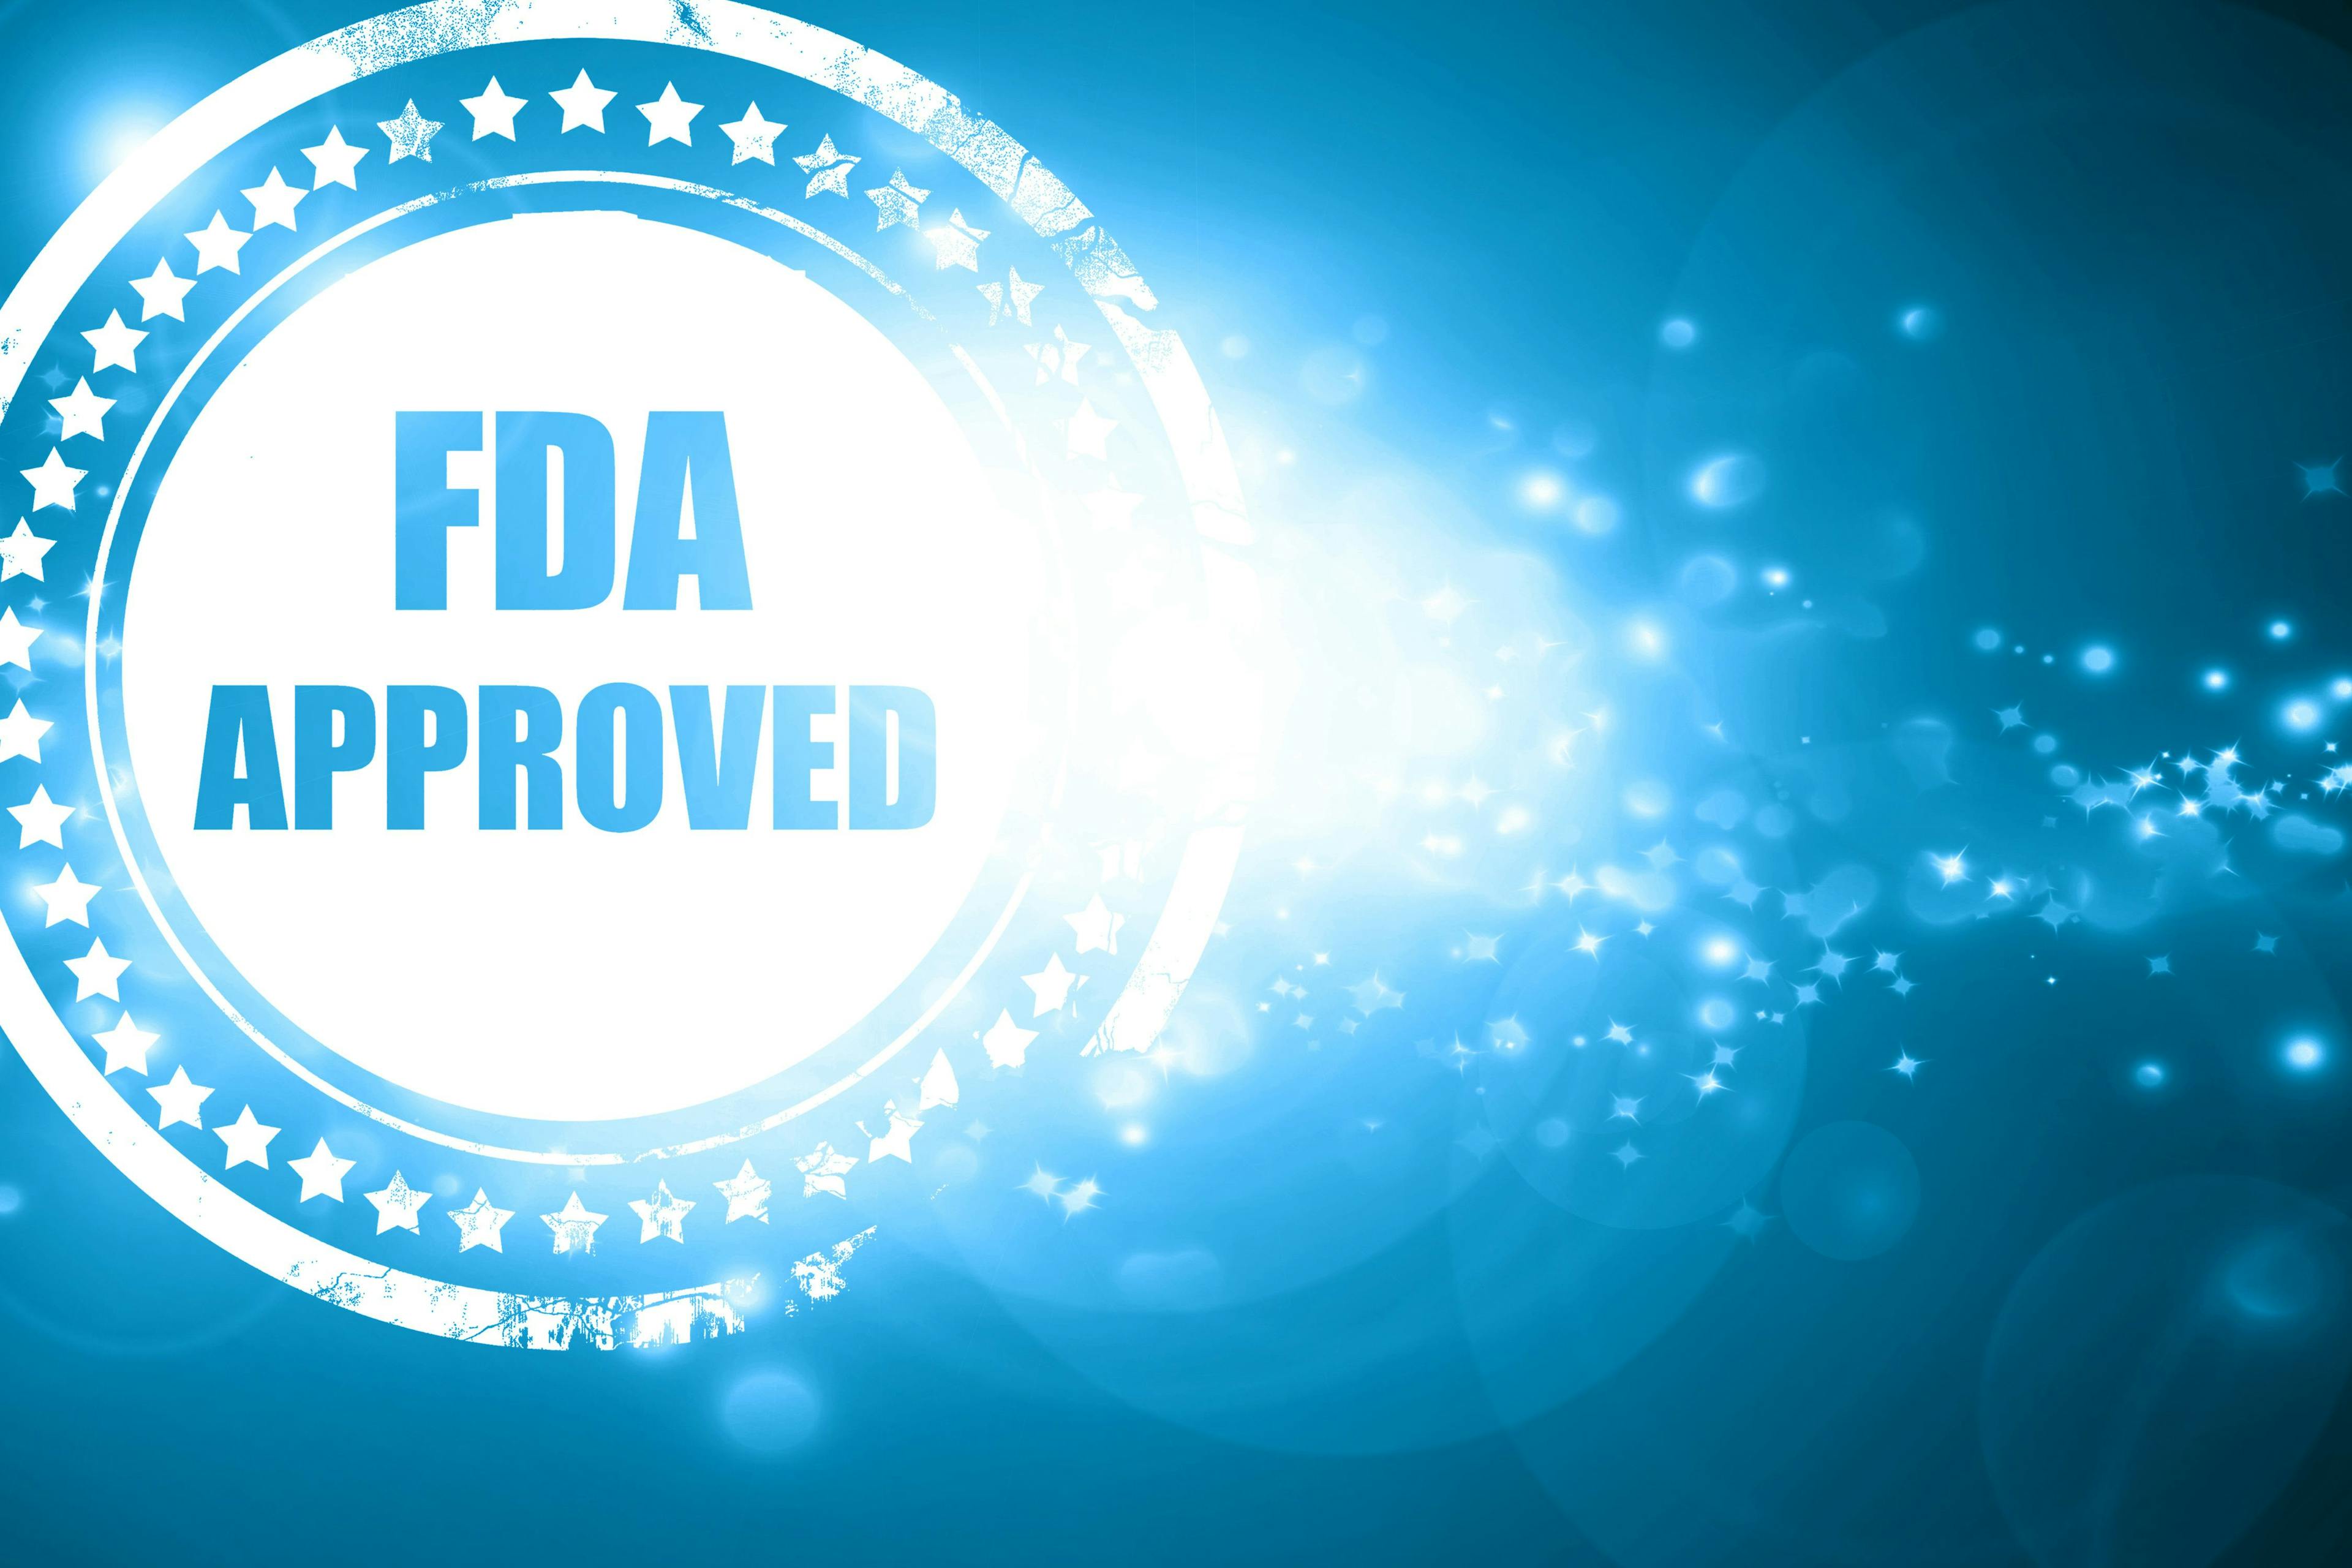 Industry leaders react to FDA’s pegcetacoplan approval